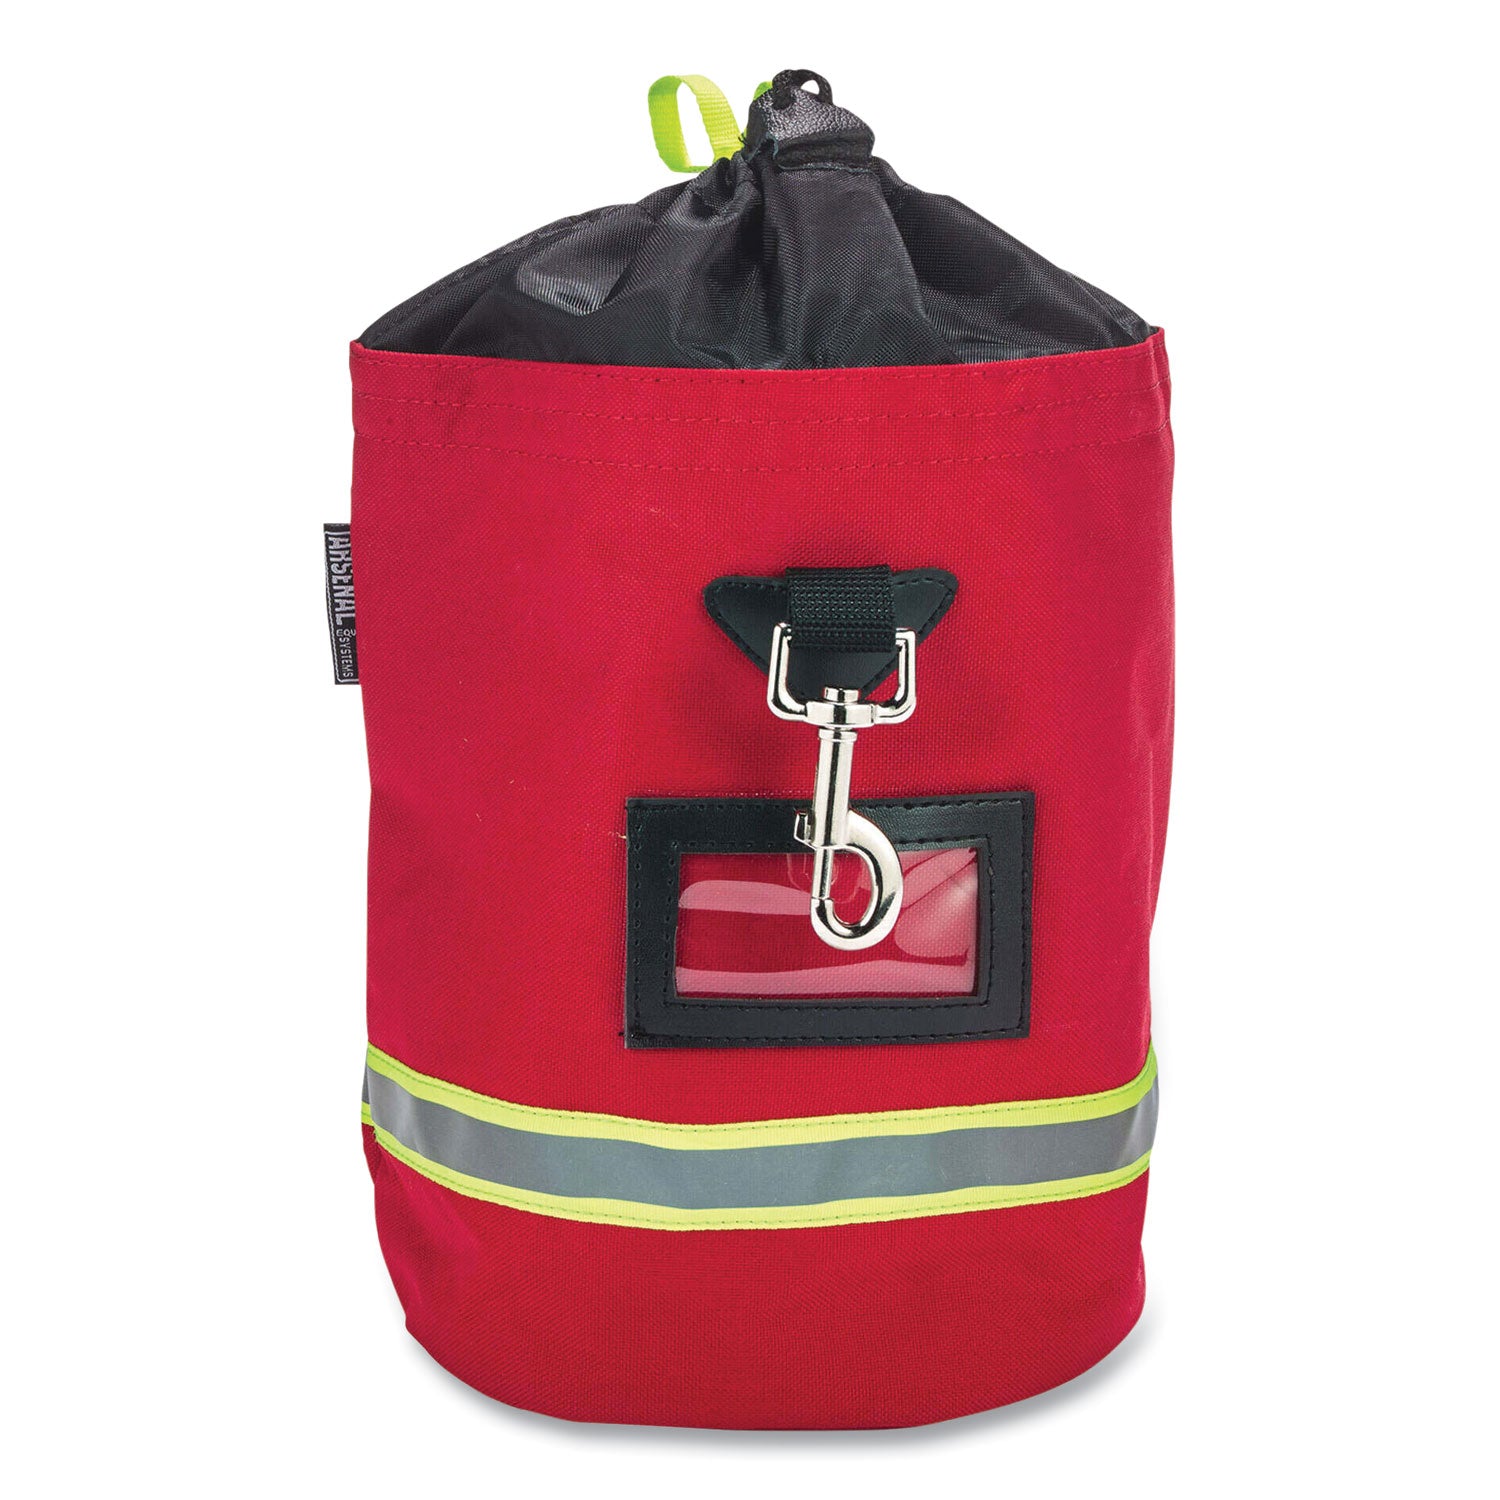 arsenal-5080l-fleece-lined-scba-mask-bag-with-drawstring-closure-85-x-85-x-14-red-ships-in-1-3-business-days_ego13081 - 2